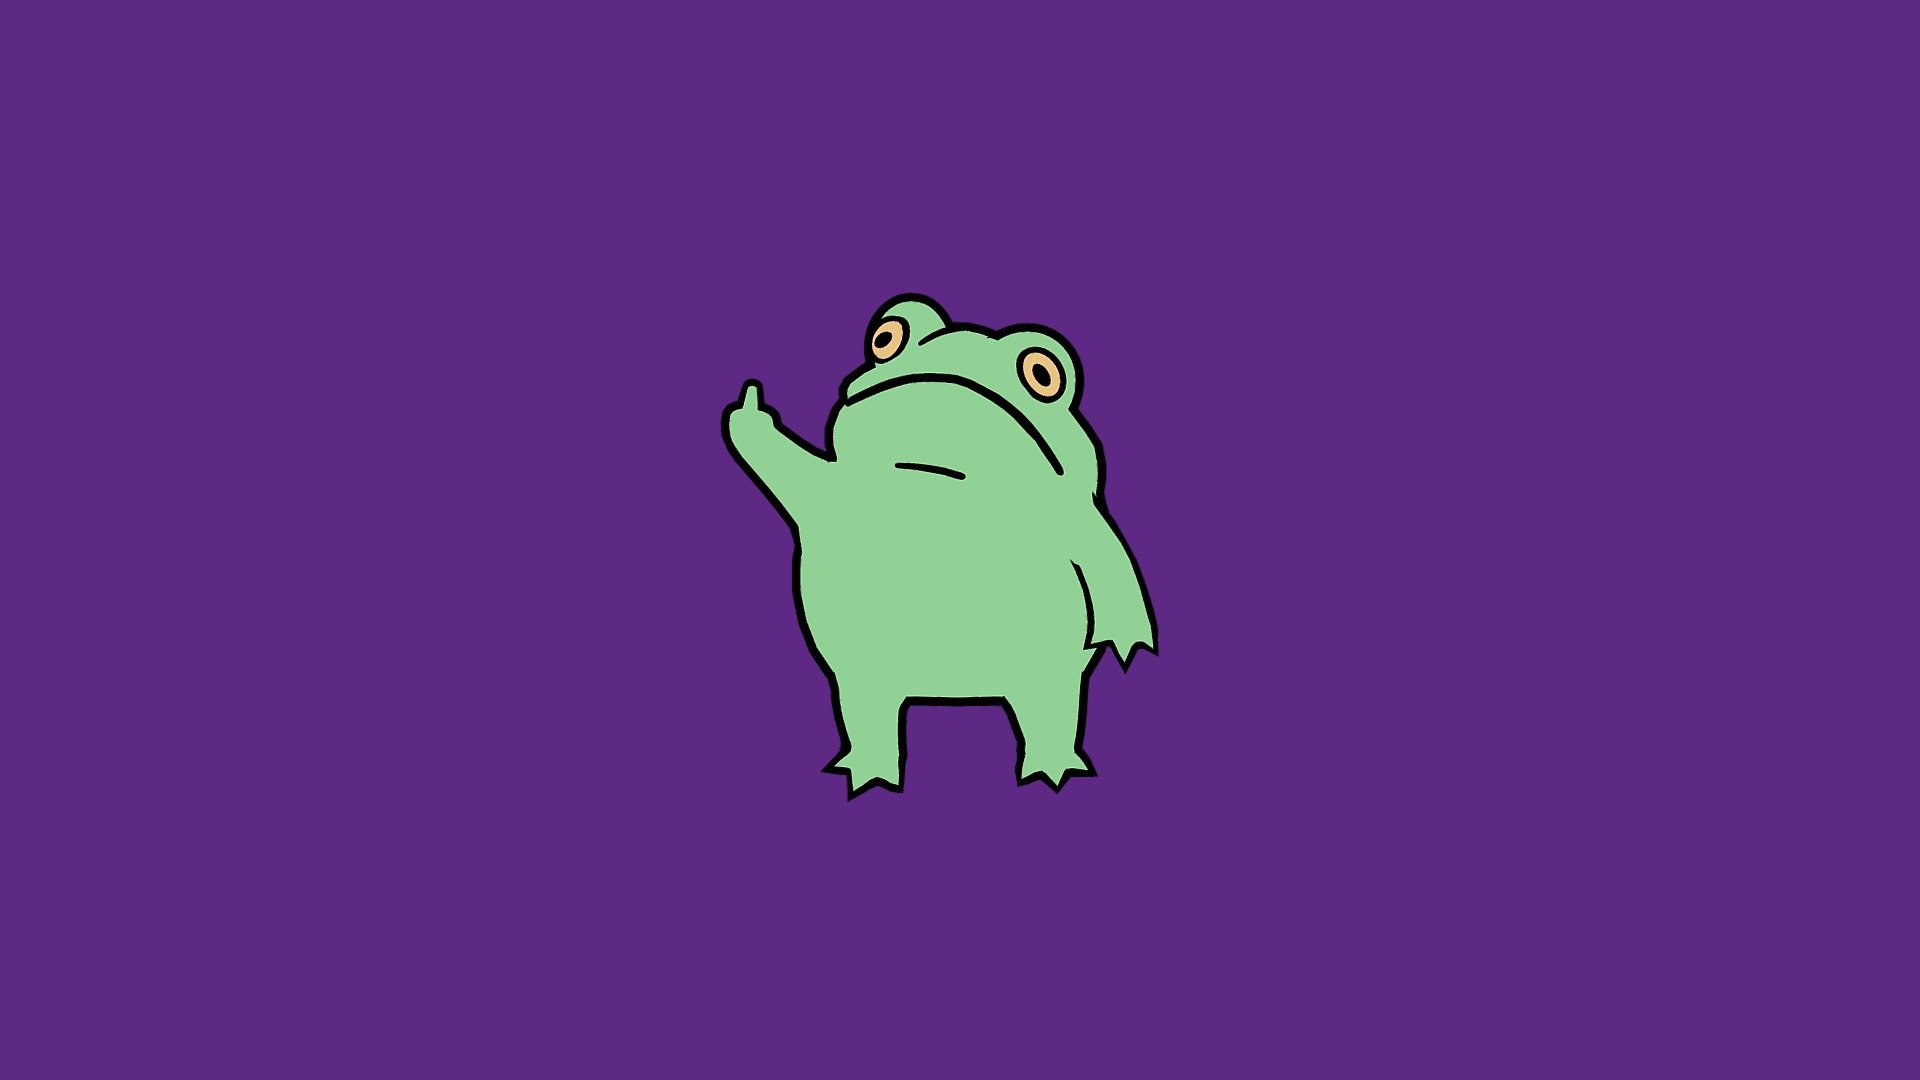 Hi! Frick Frog is a pin design by my friend Ina (https://sketchfab.com/ina_tomecek) (https://www.inatomecek.com/) who has a wonderful little shop called BooJuice Pins (https://www.instagram.com/boojuicepins/?hl=en)! You can search for the shop on Etsy! I think it's safe to say I'm obsessed with Frick Frog!!!! You should go check out the shop and treat yourself or somebody else to something cute! :3

Modeled in Maya, textured in Photoshop! - Frick Frog - 3D model by Shelby Merrill (@polygoth) 3d model